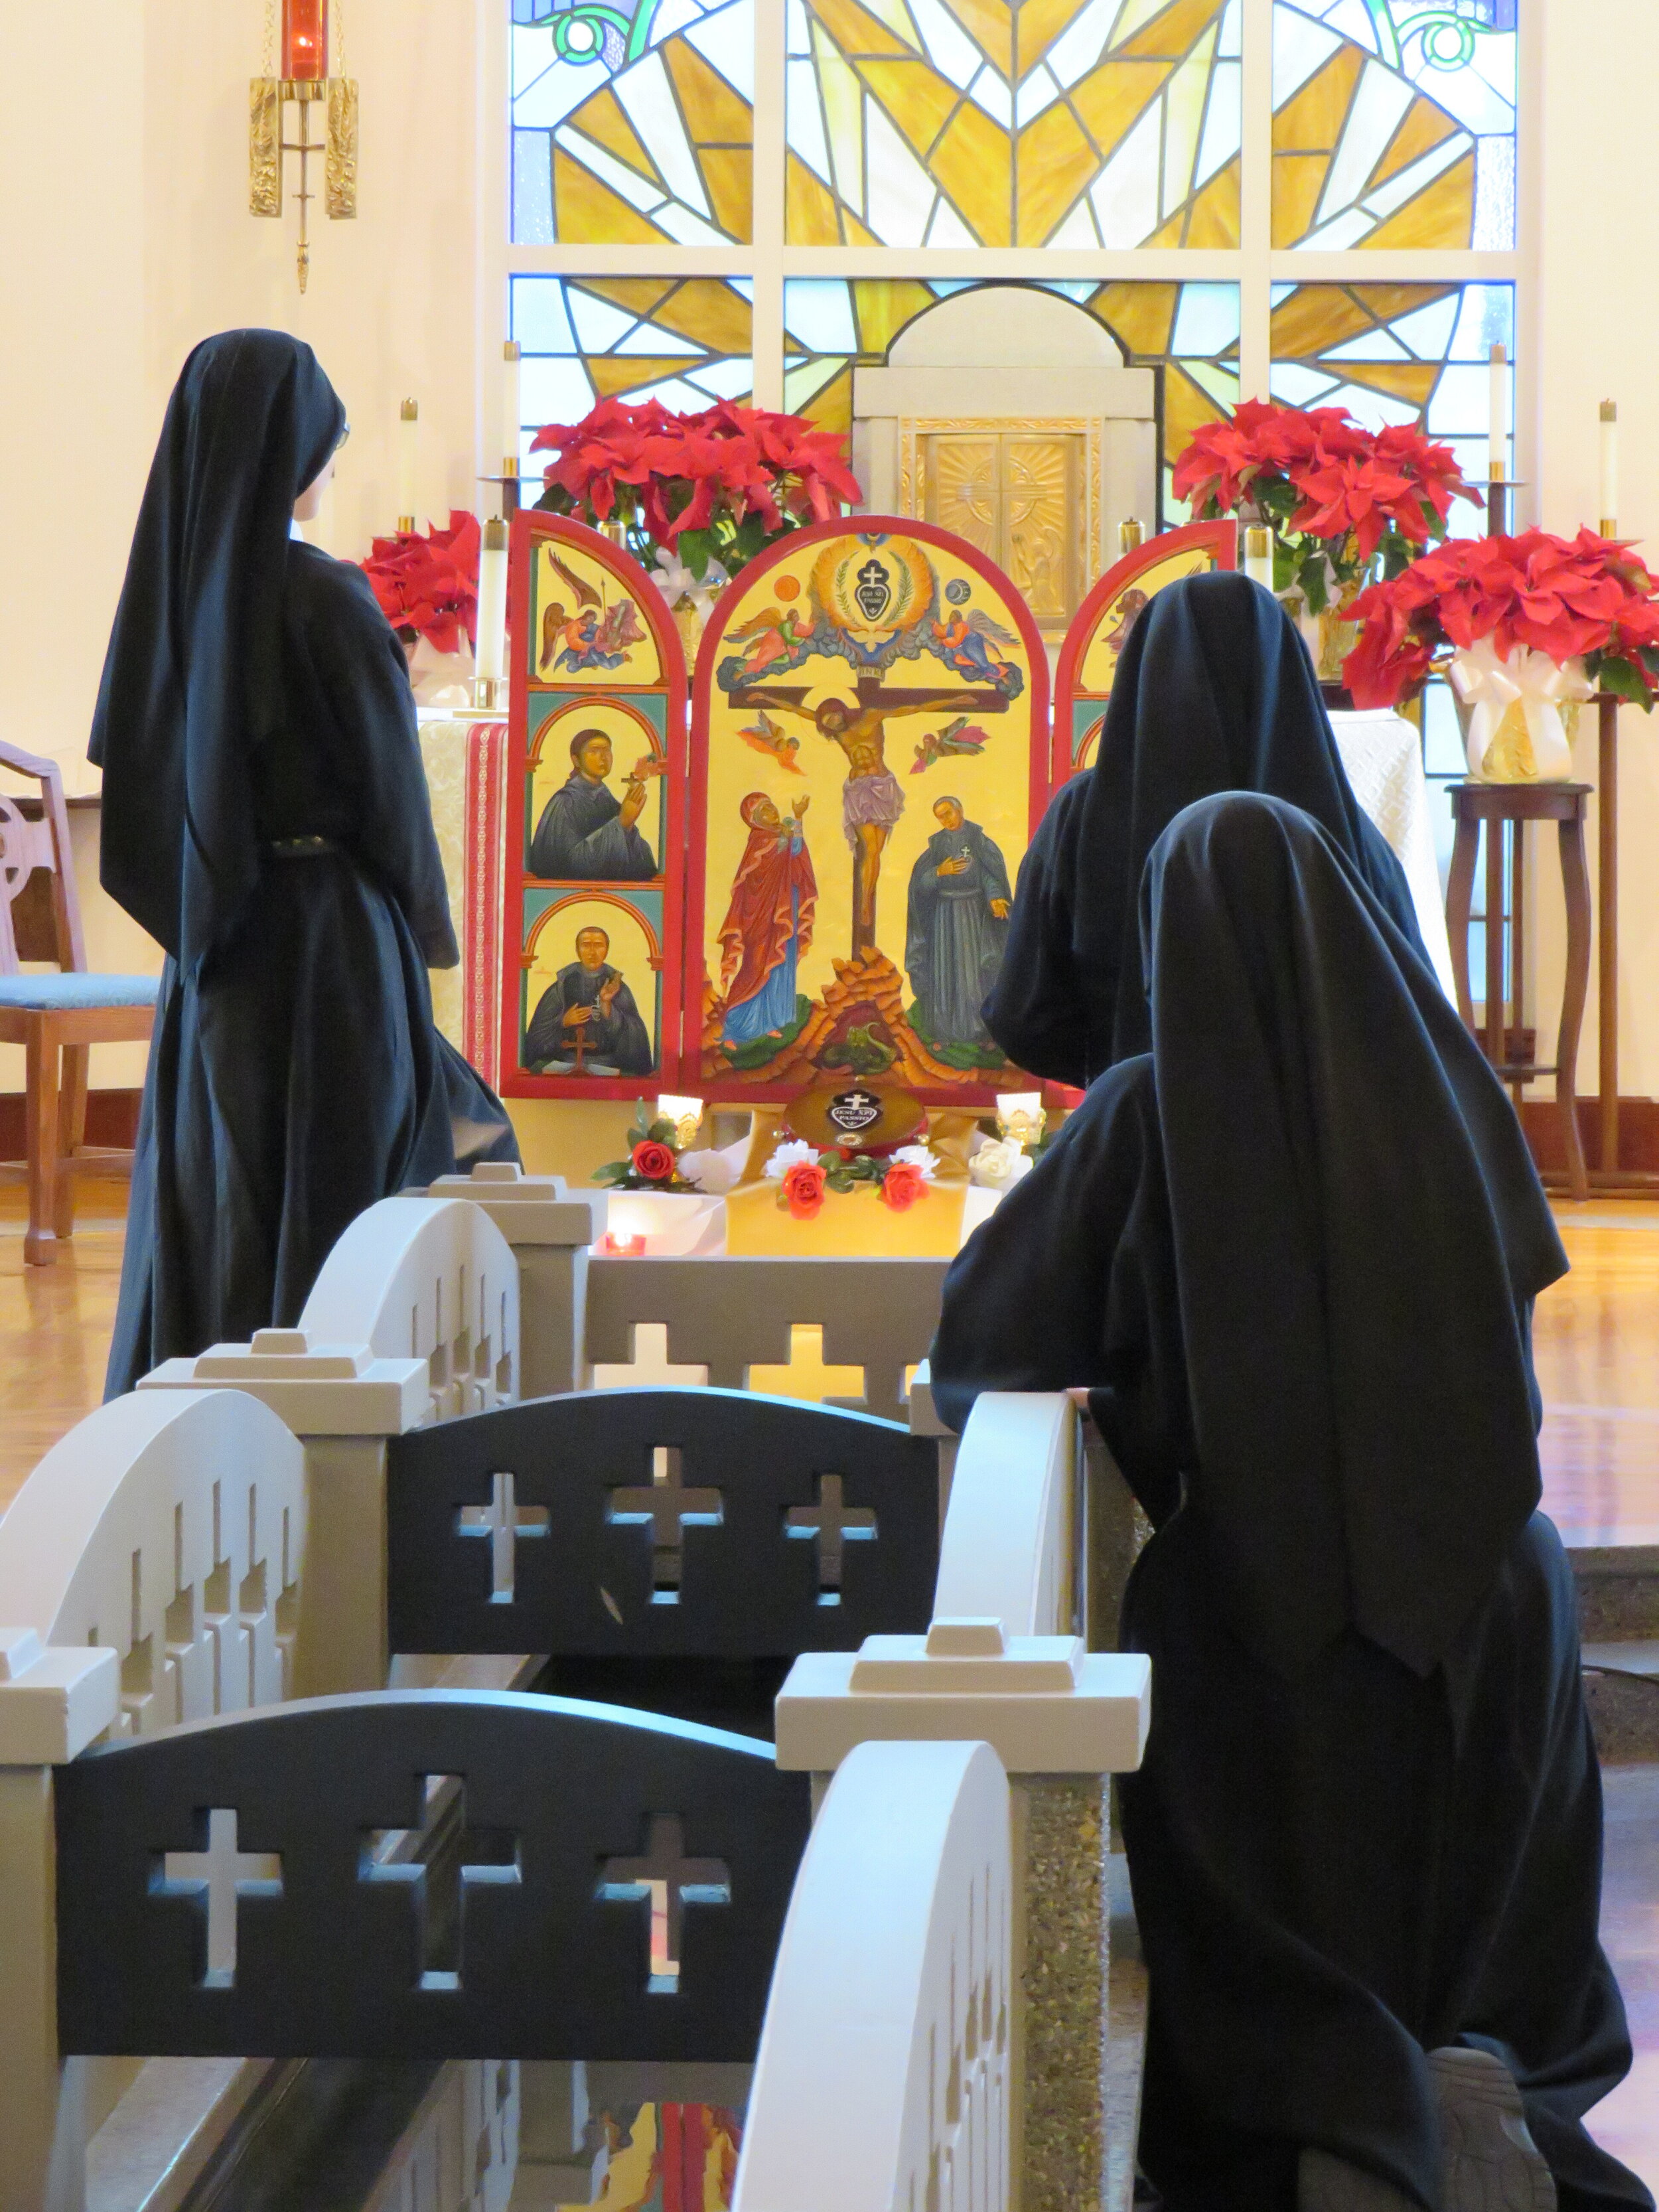  The nuns take time for prayer before the icon and their founder’s relic. 